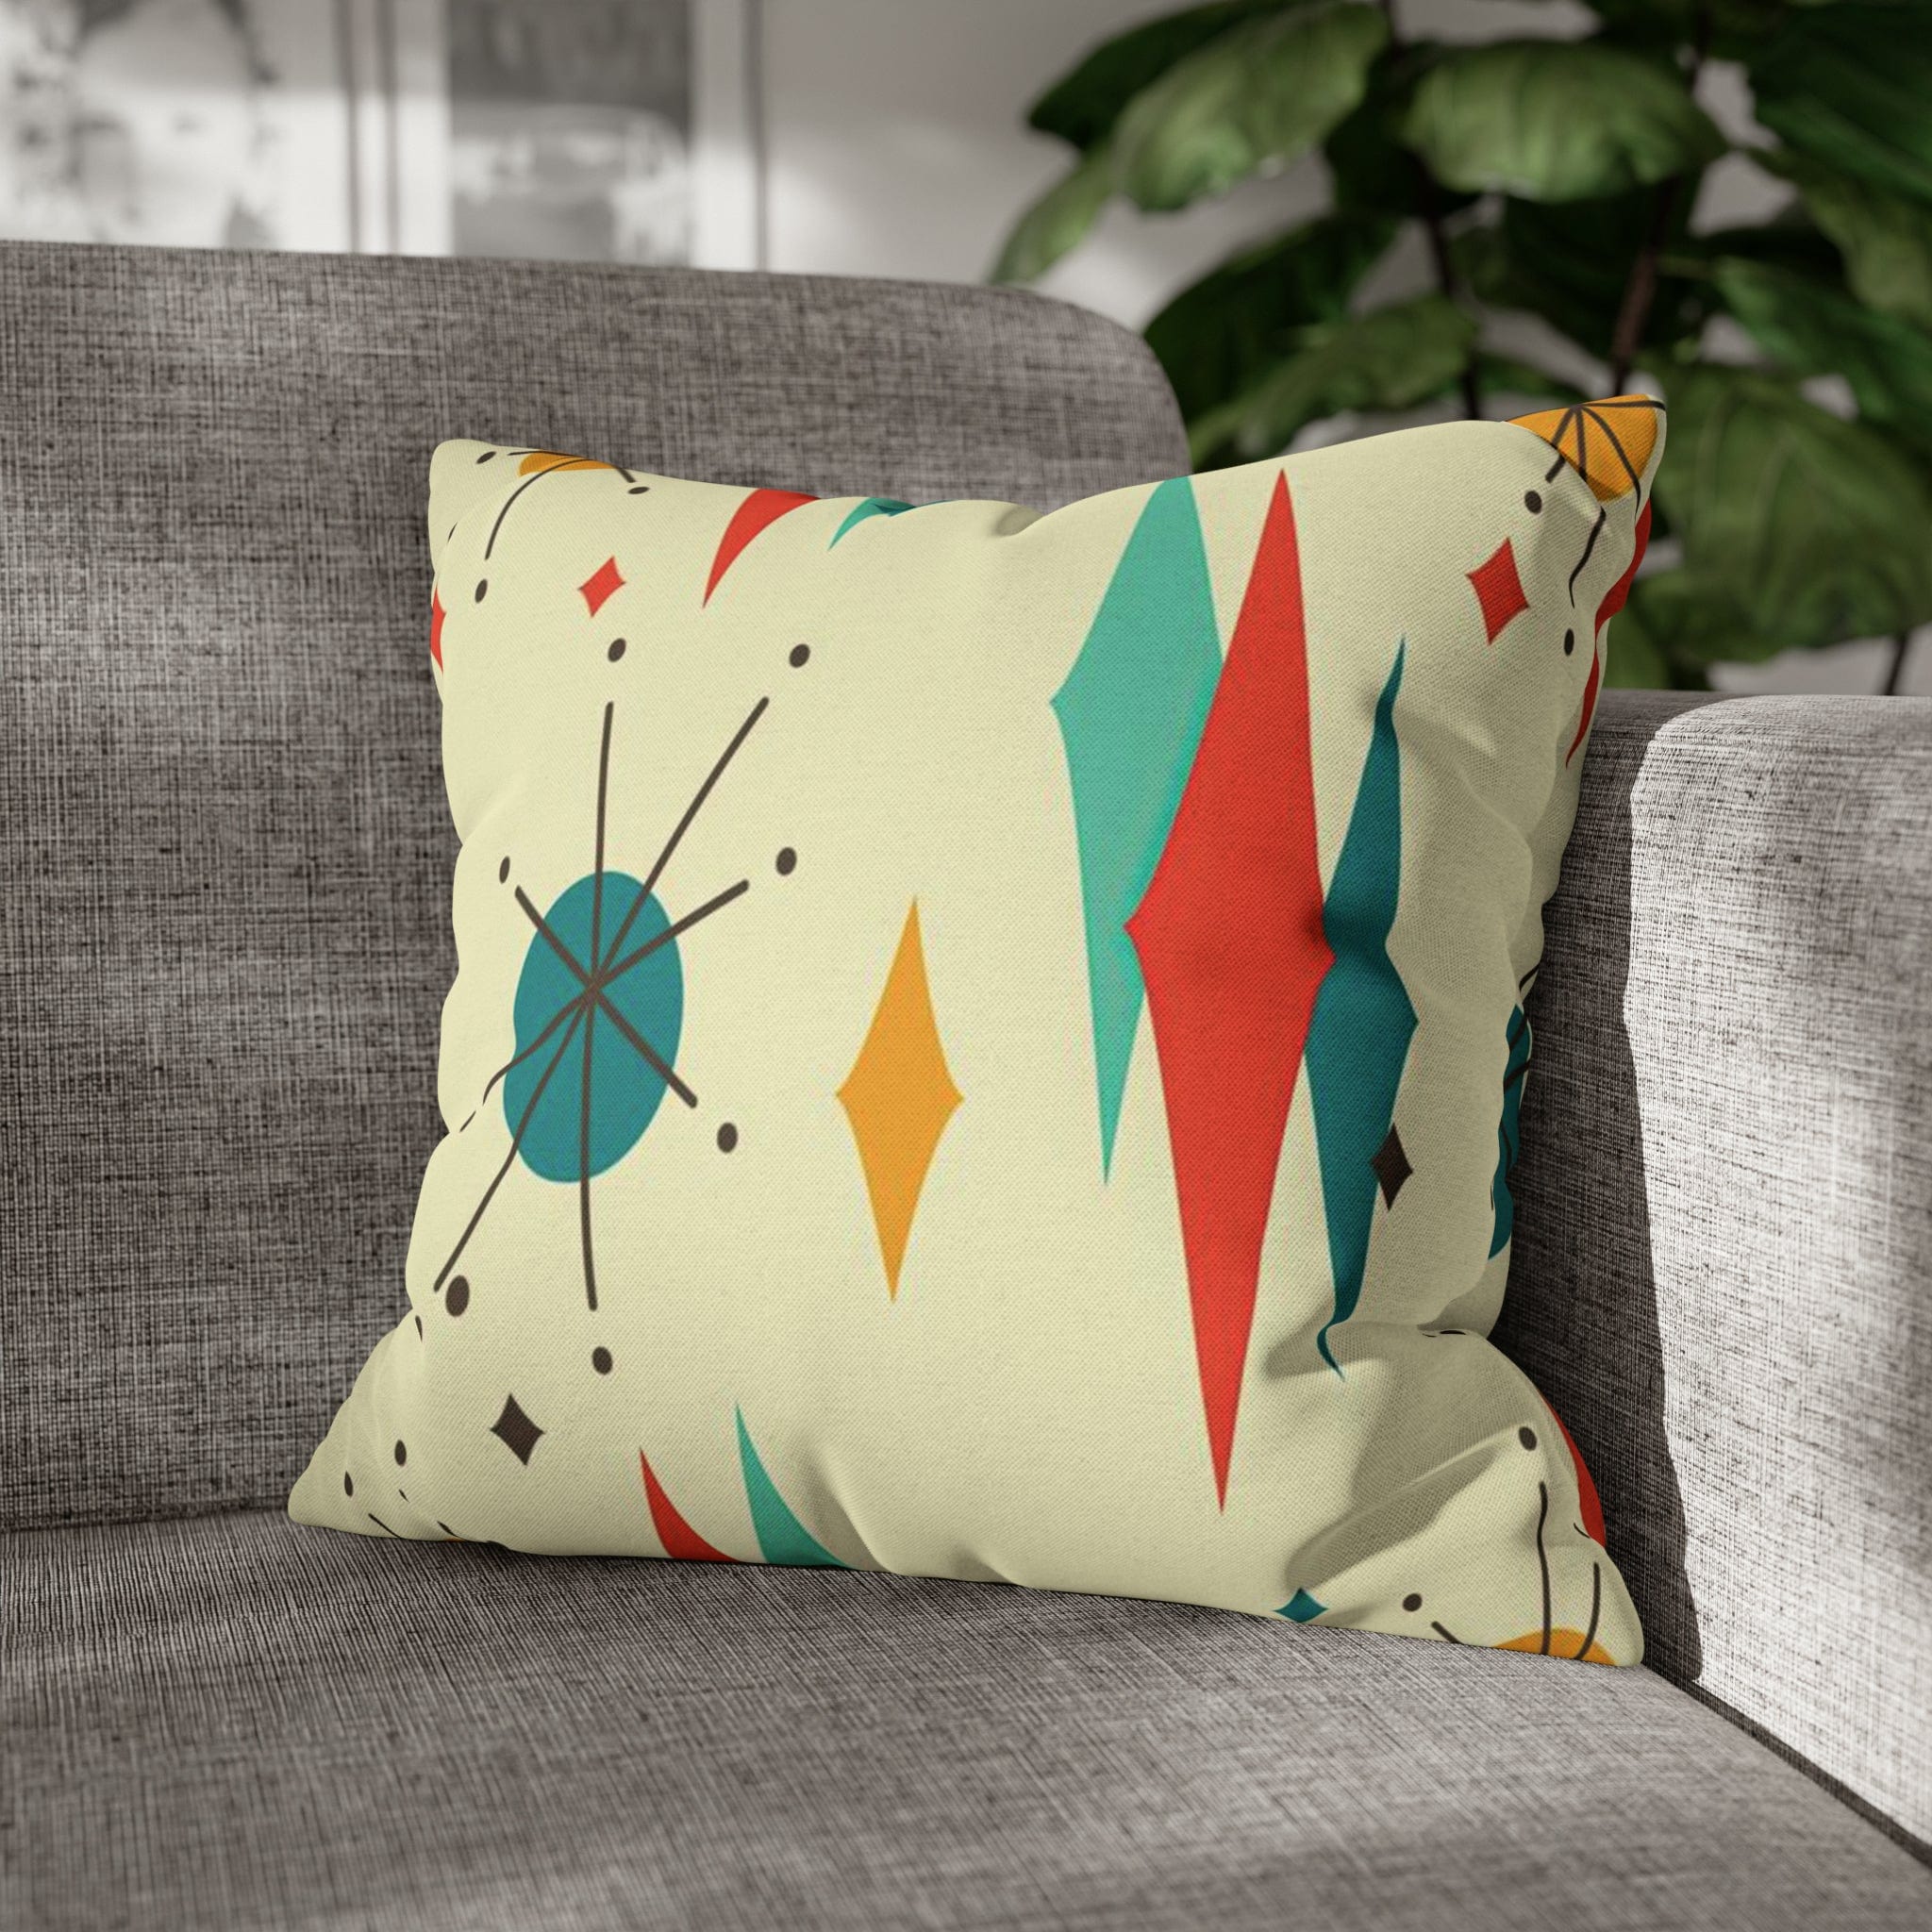 Printify Franciscan Diamond Starburst Throw Pillow Covers in Mid Century Modern Orange, Teal, Cream Hues, Retro 50s MCM Cushion Cover Home Decor 18&quot; × 18&quot; 79205268599661753187